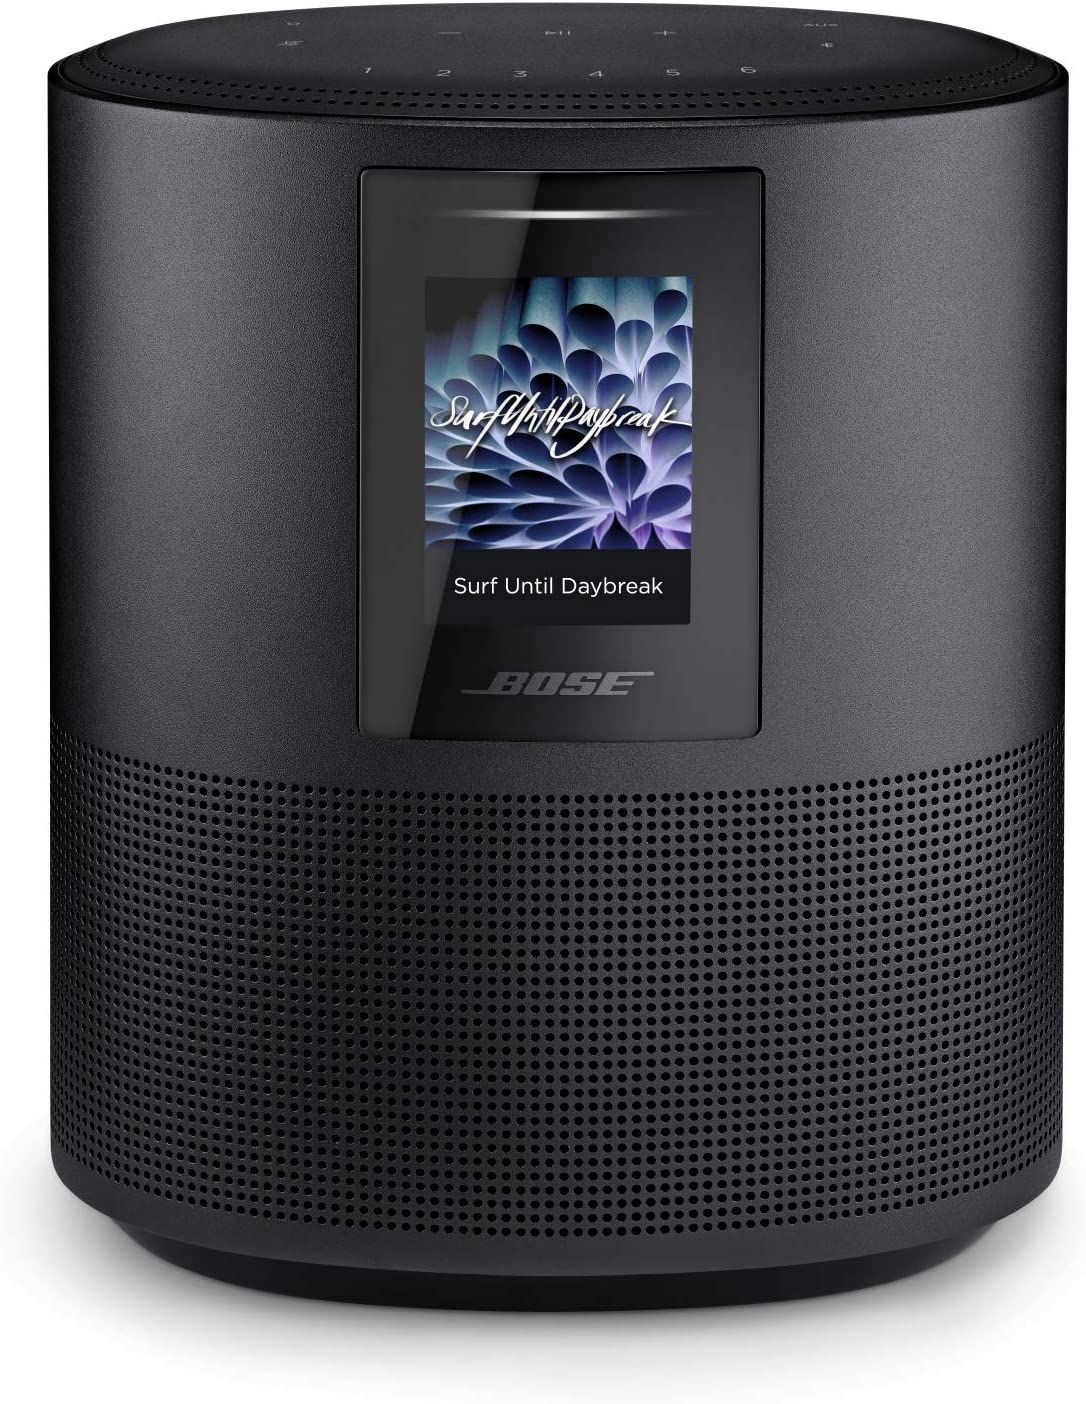 The 10 Best Smart Speakers on Amazon (Updated 2022)